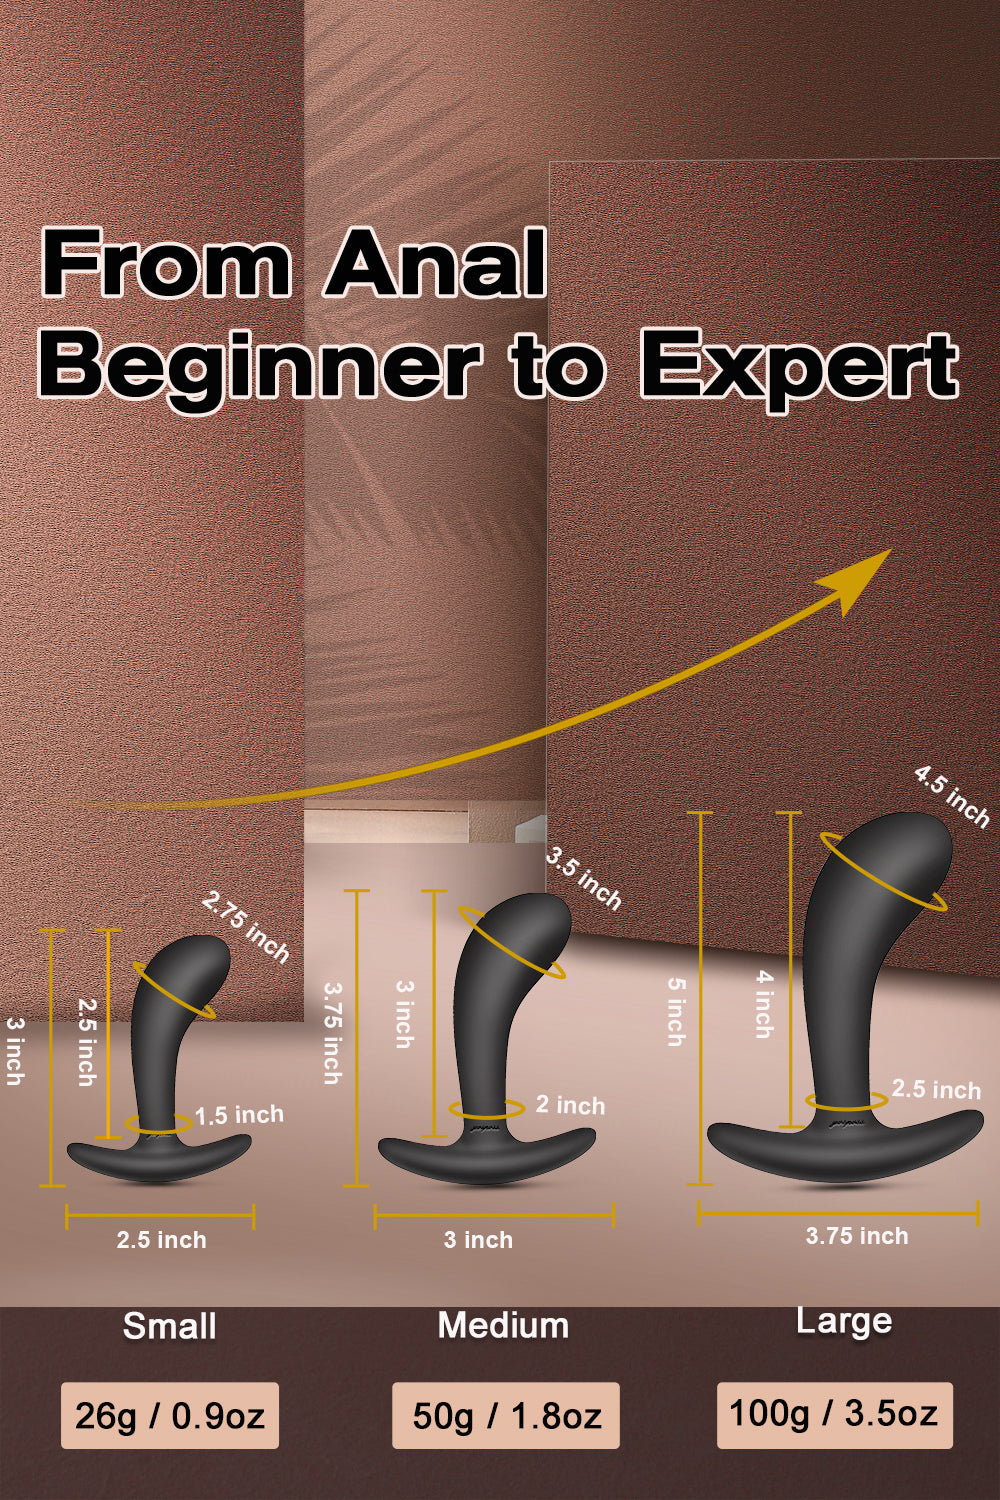 Anal Toys Set,Areskey Butt Plug Trainer Kit for Comfortable Long-Term Wear, Pack of 3 Silicone Anal Plugs Training Set with Flared Base Prostate Sex Toys for Beginners Advanced Users